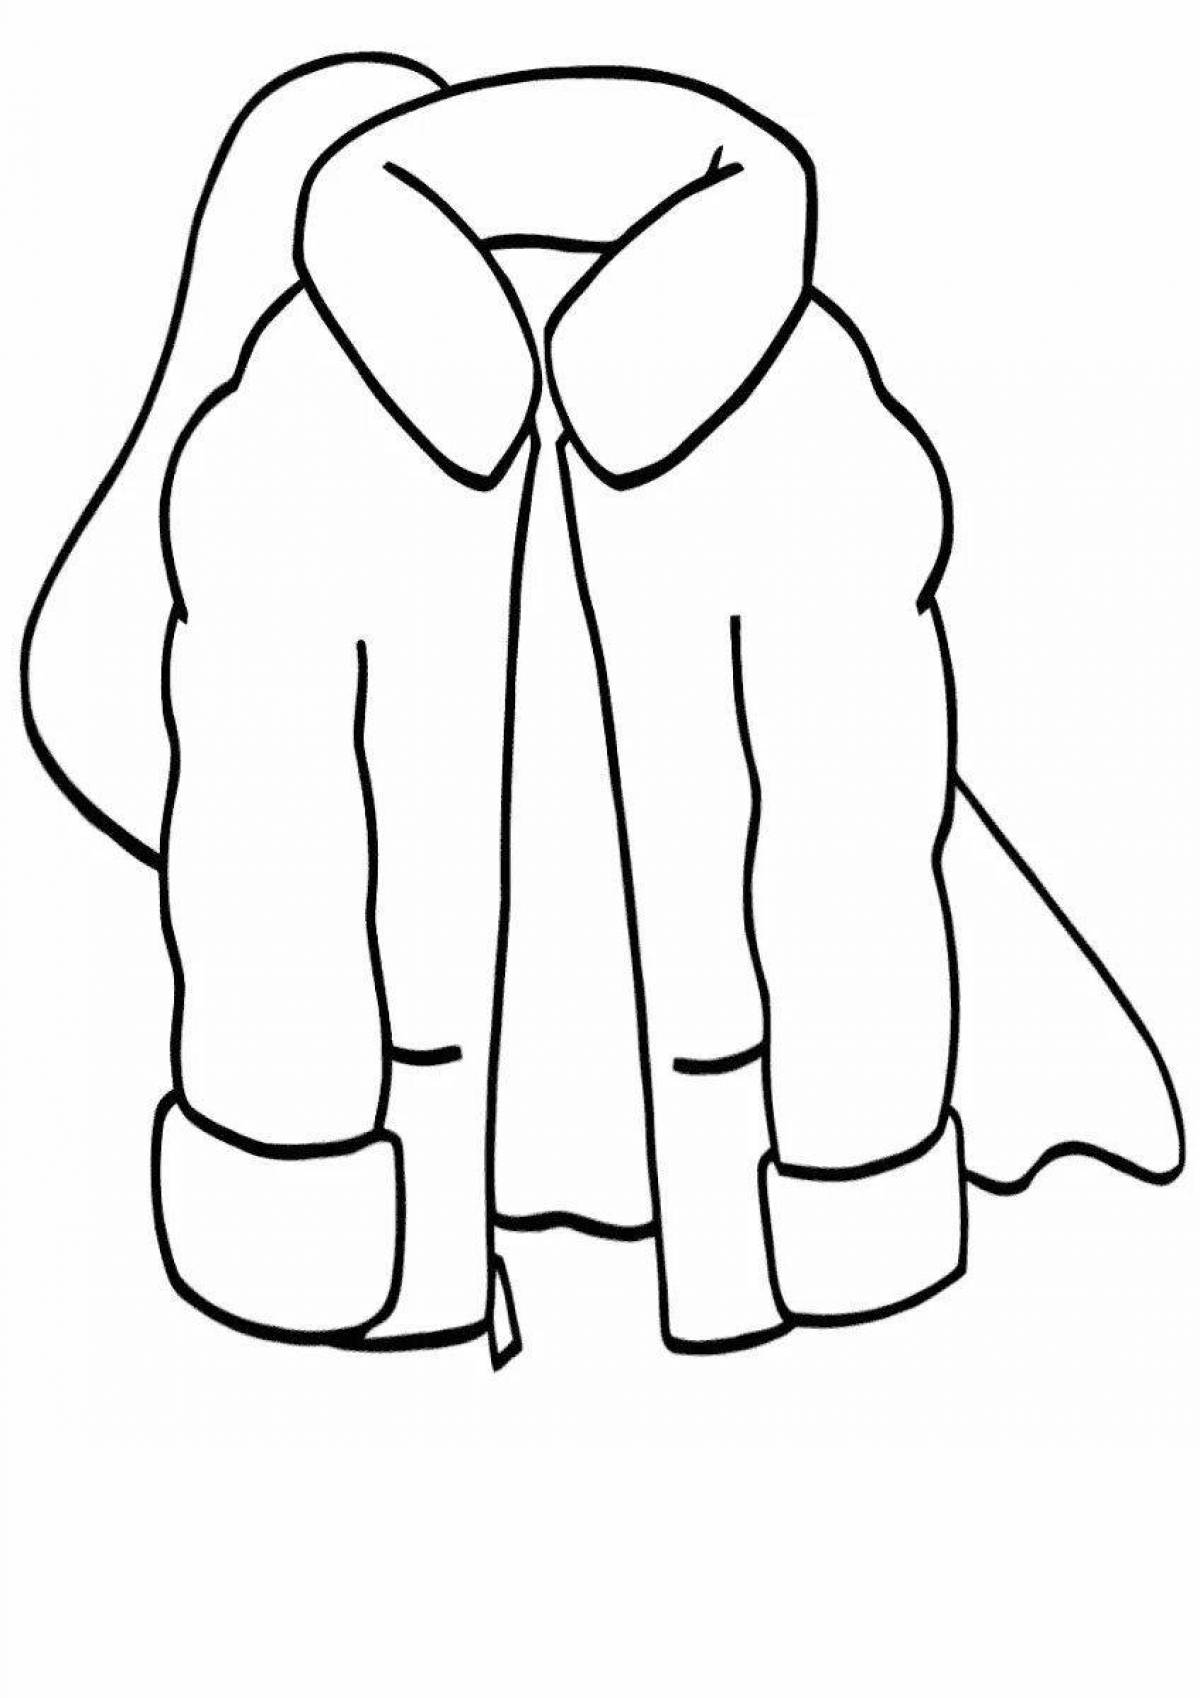 Fun fur coat coloring page for babies